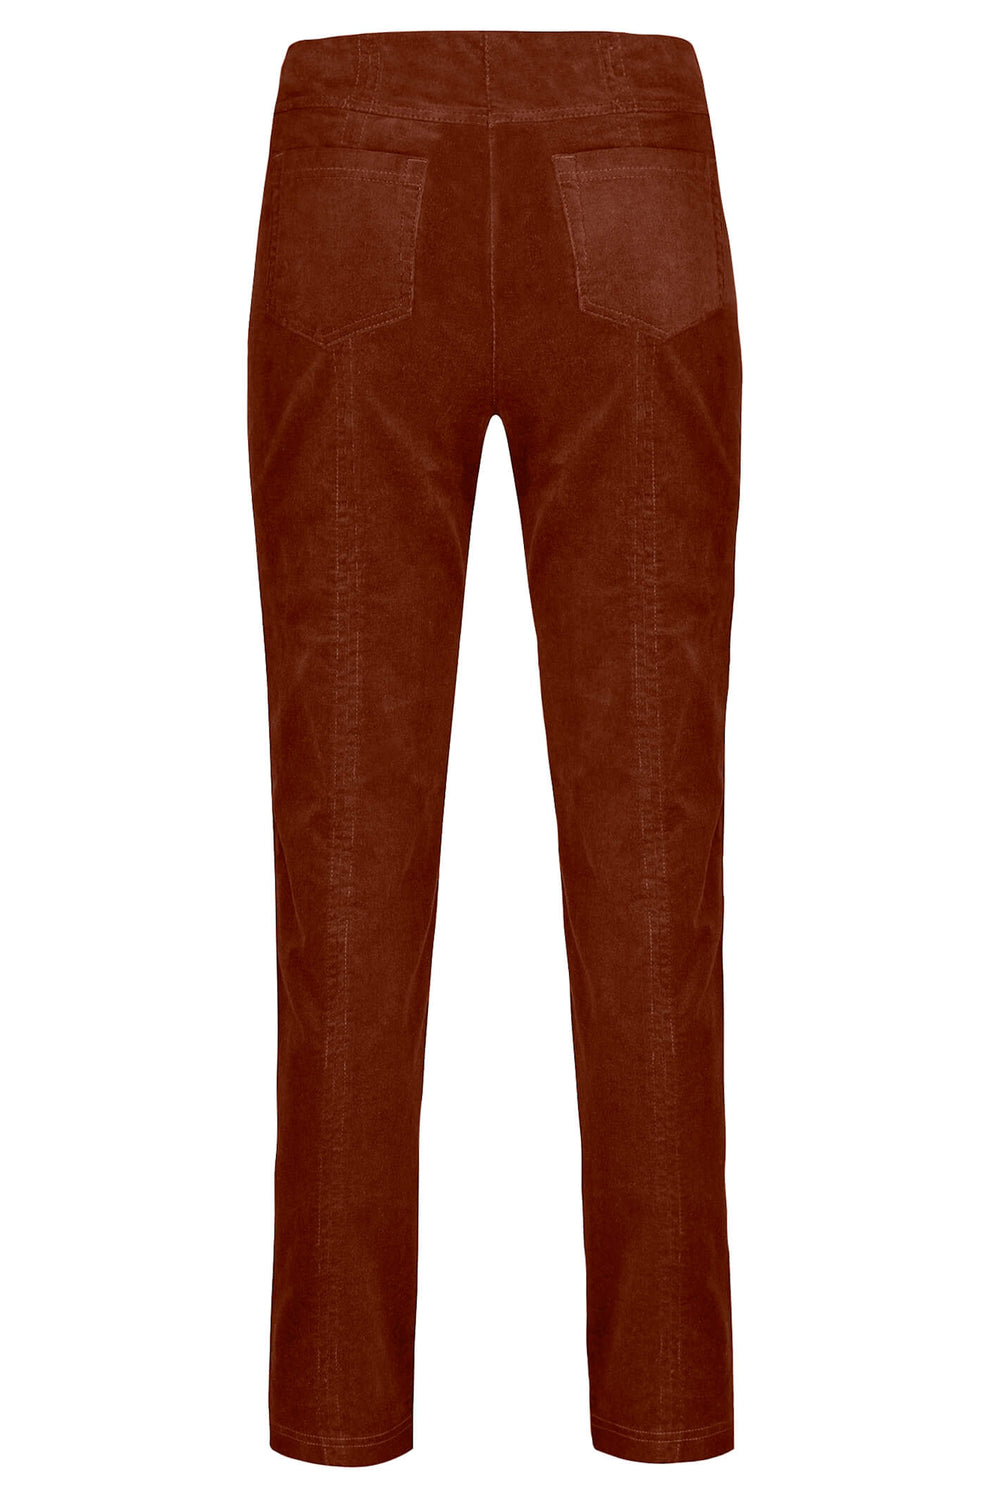 Robell 52457 290 Chestnut Brown Bella Needlechord Trousers - Experience Boutique